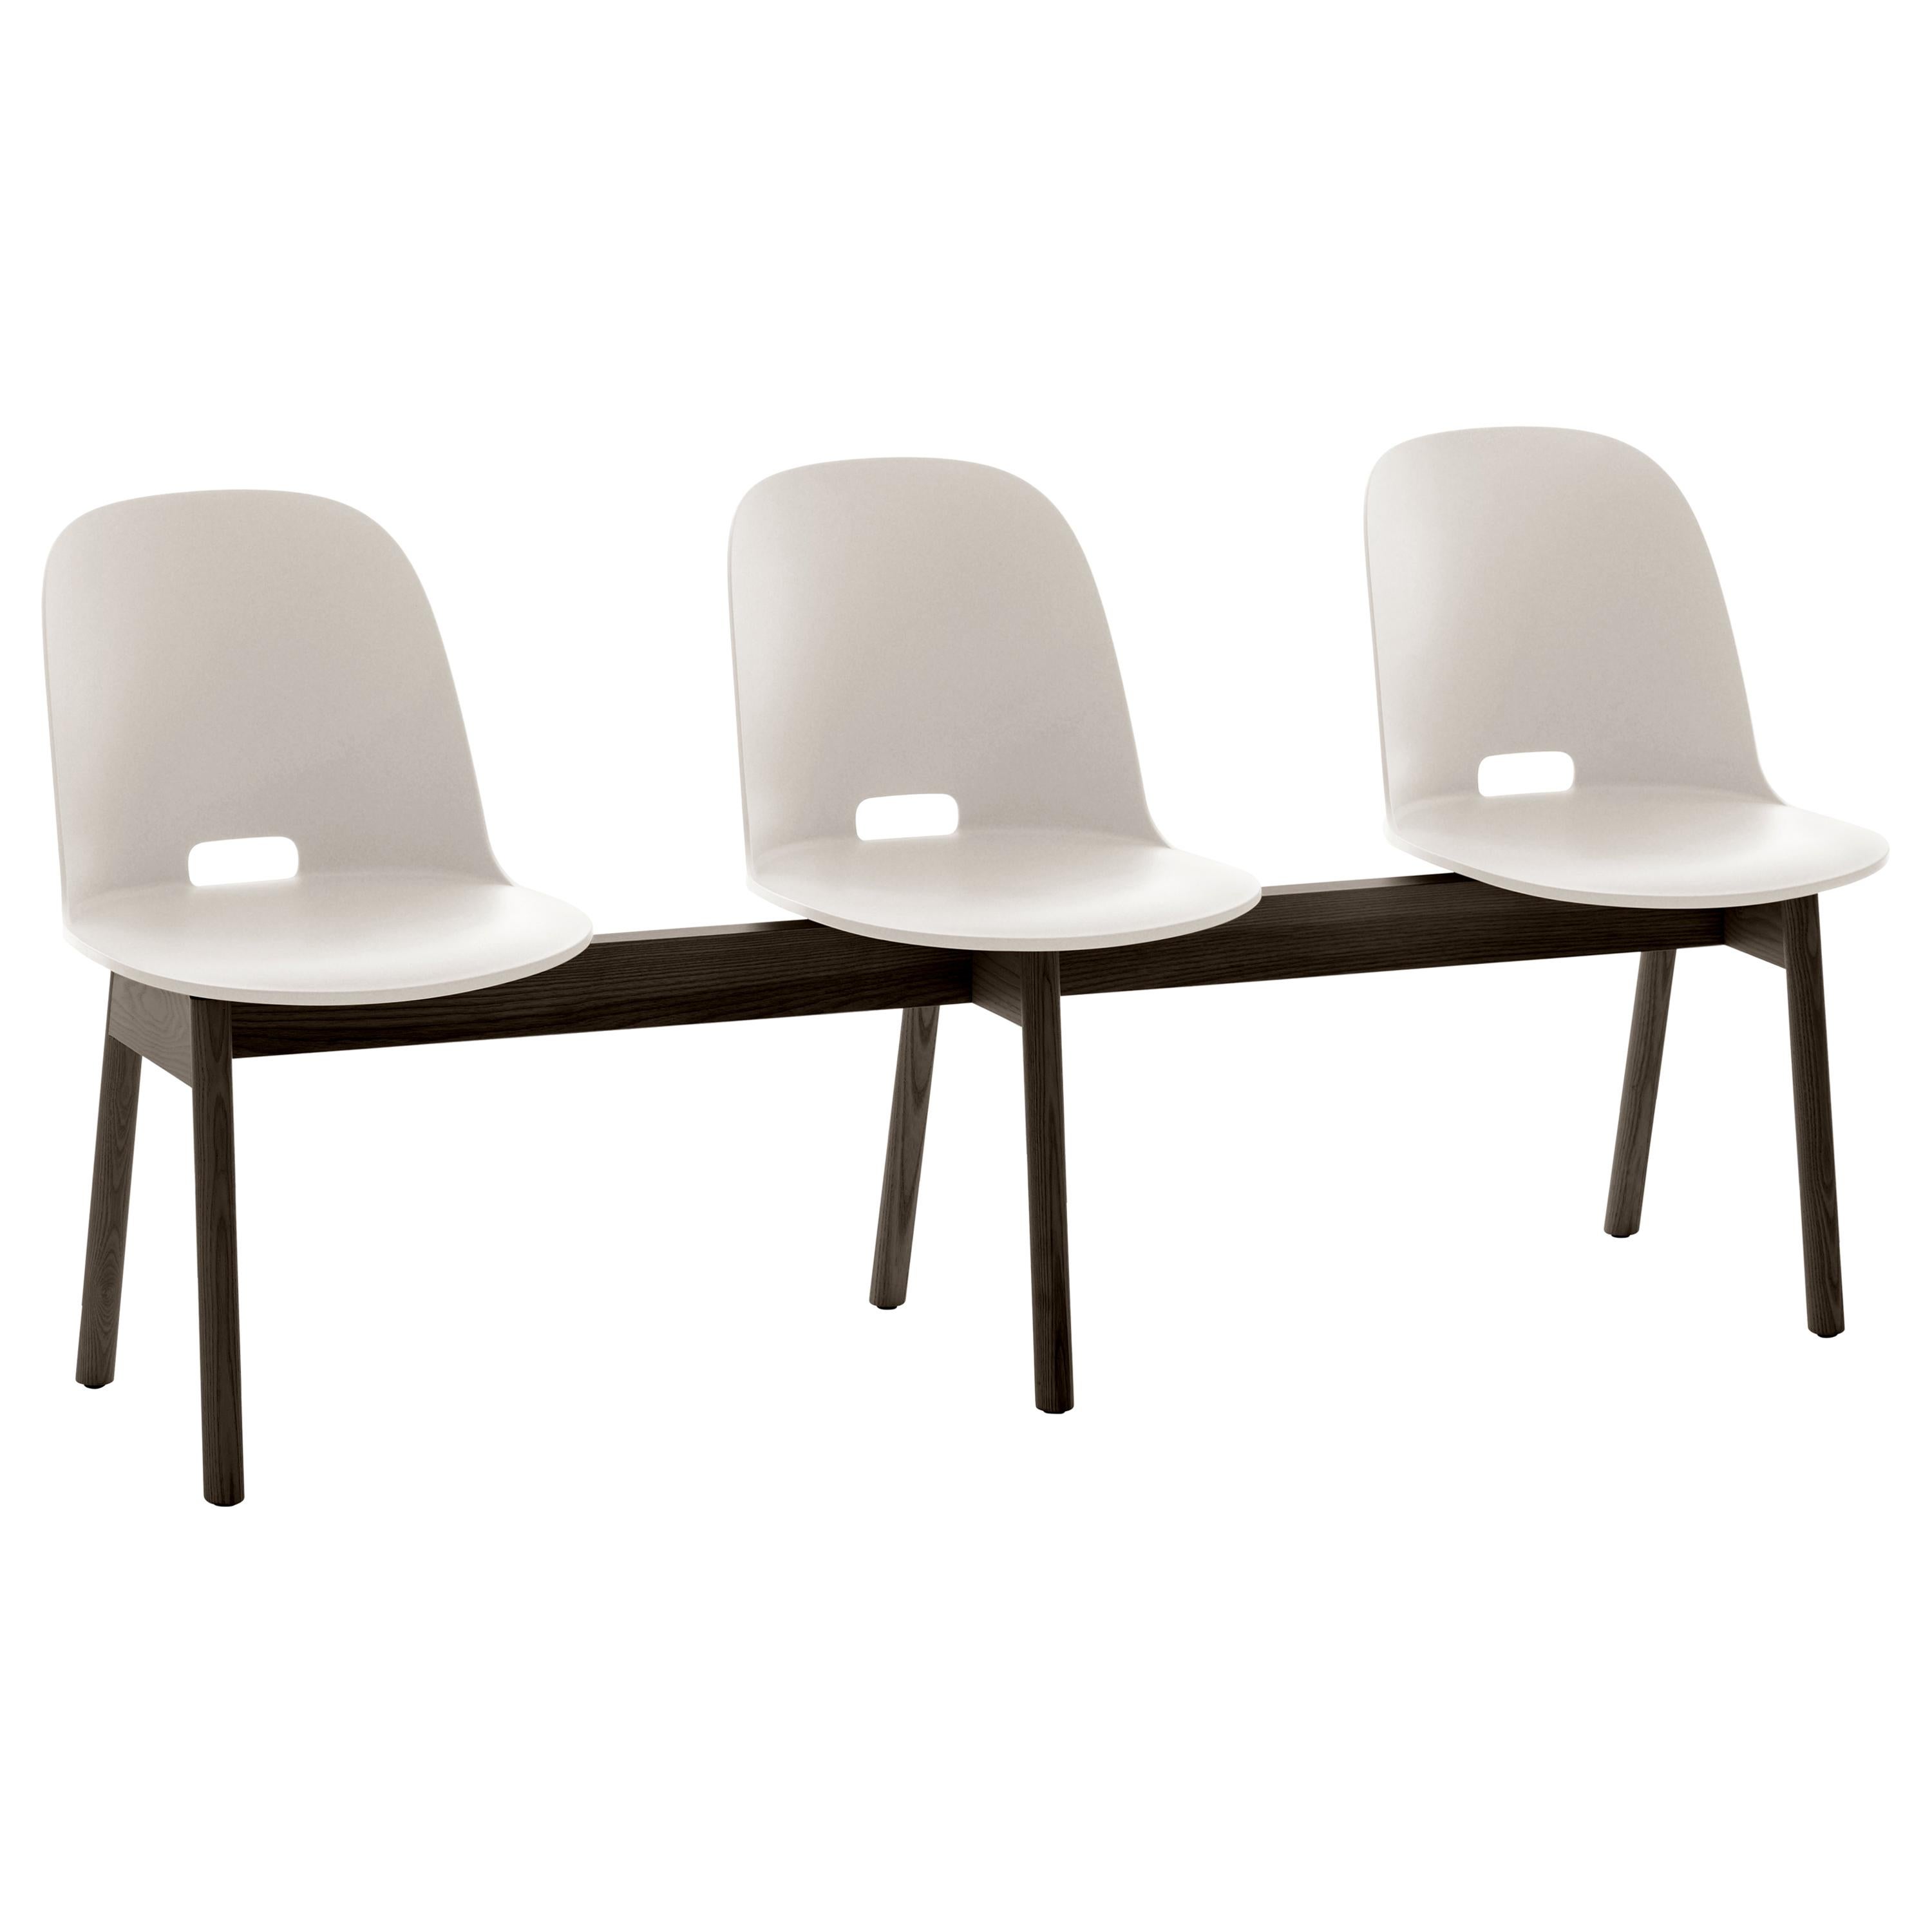 Emeco Alfi 3-Seat Bench in White and Dark Ash with High Back by Jasper Morrison For Sale